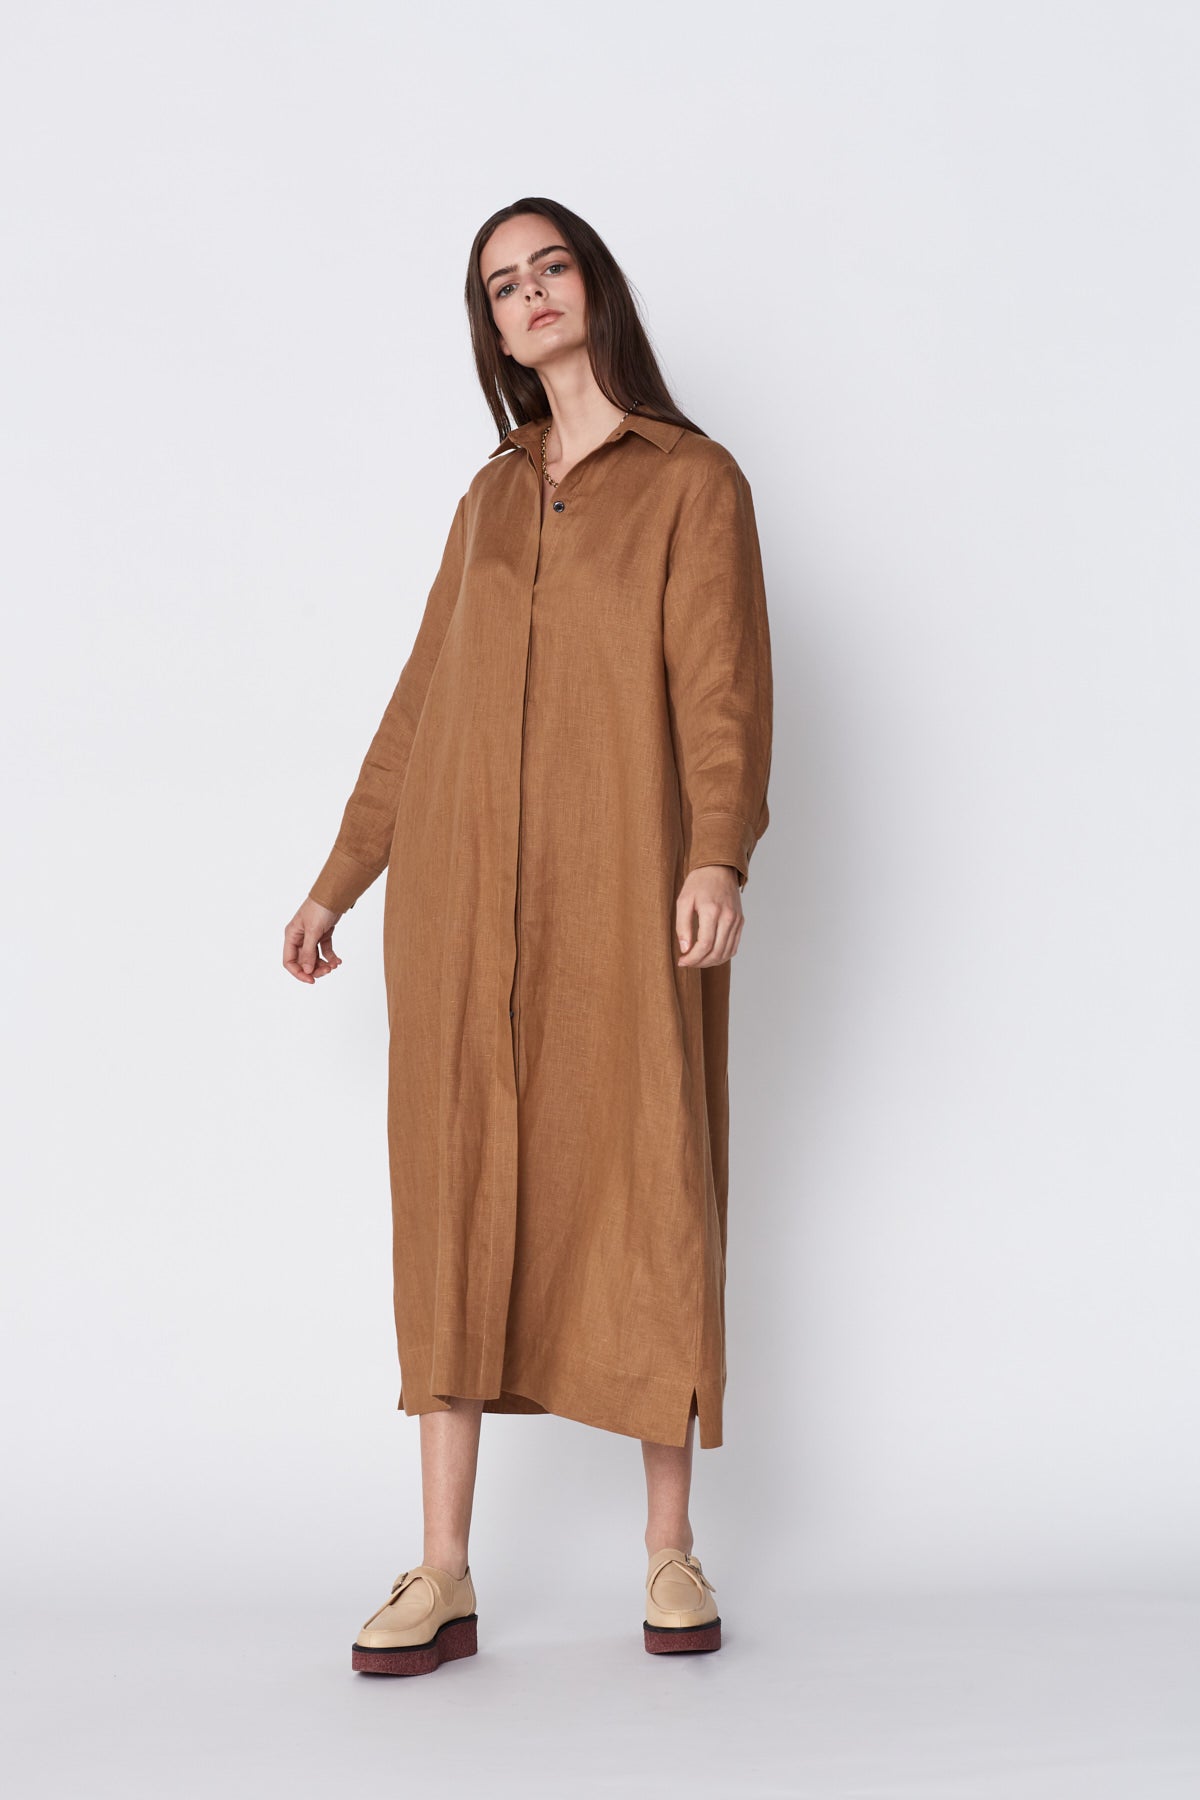 Lydia Long Shirt Dress in Cafe Au Lait Linen. Made in Atlanta, ethically and sustainably, by slow fashion designer Megan Huntz. 